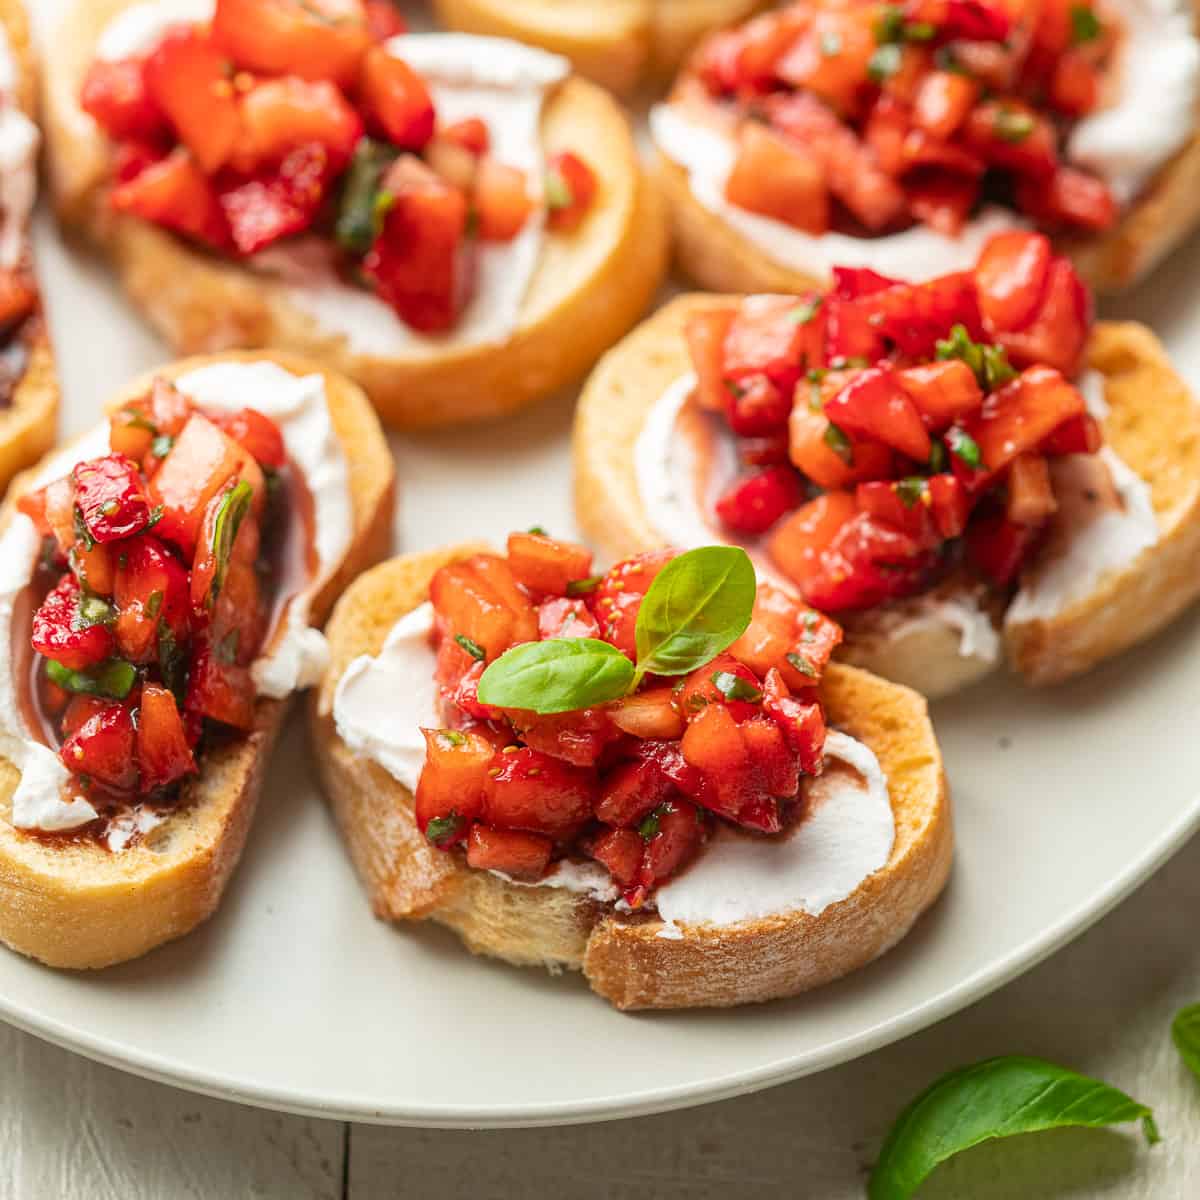 Baguette slices topped with vegan cheese and Strawberry Bruschetta on a plate.